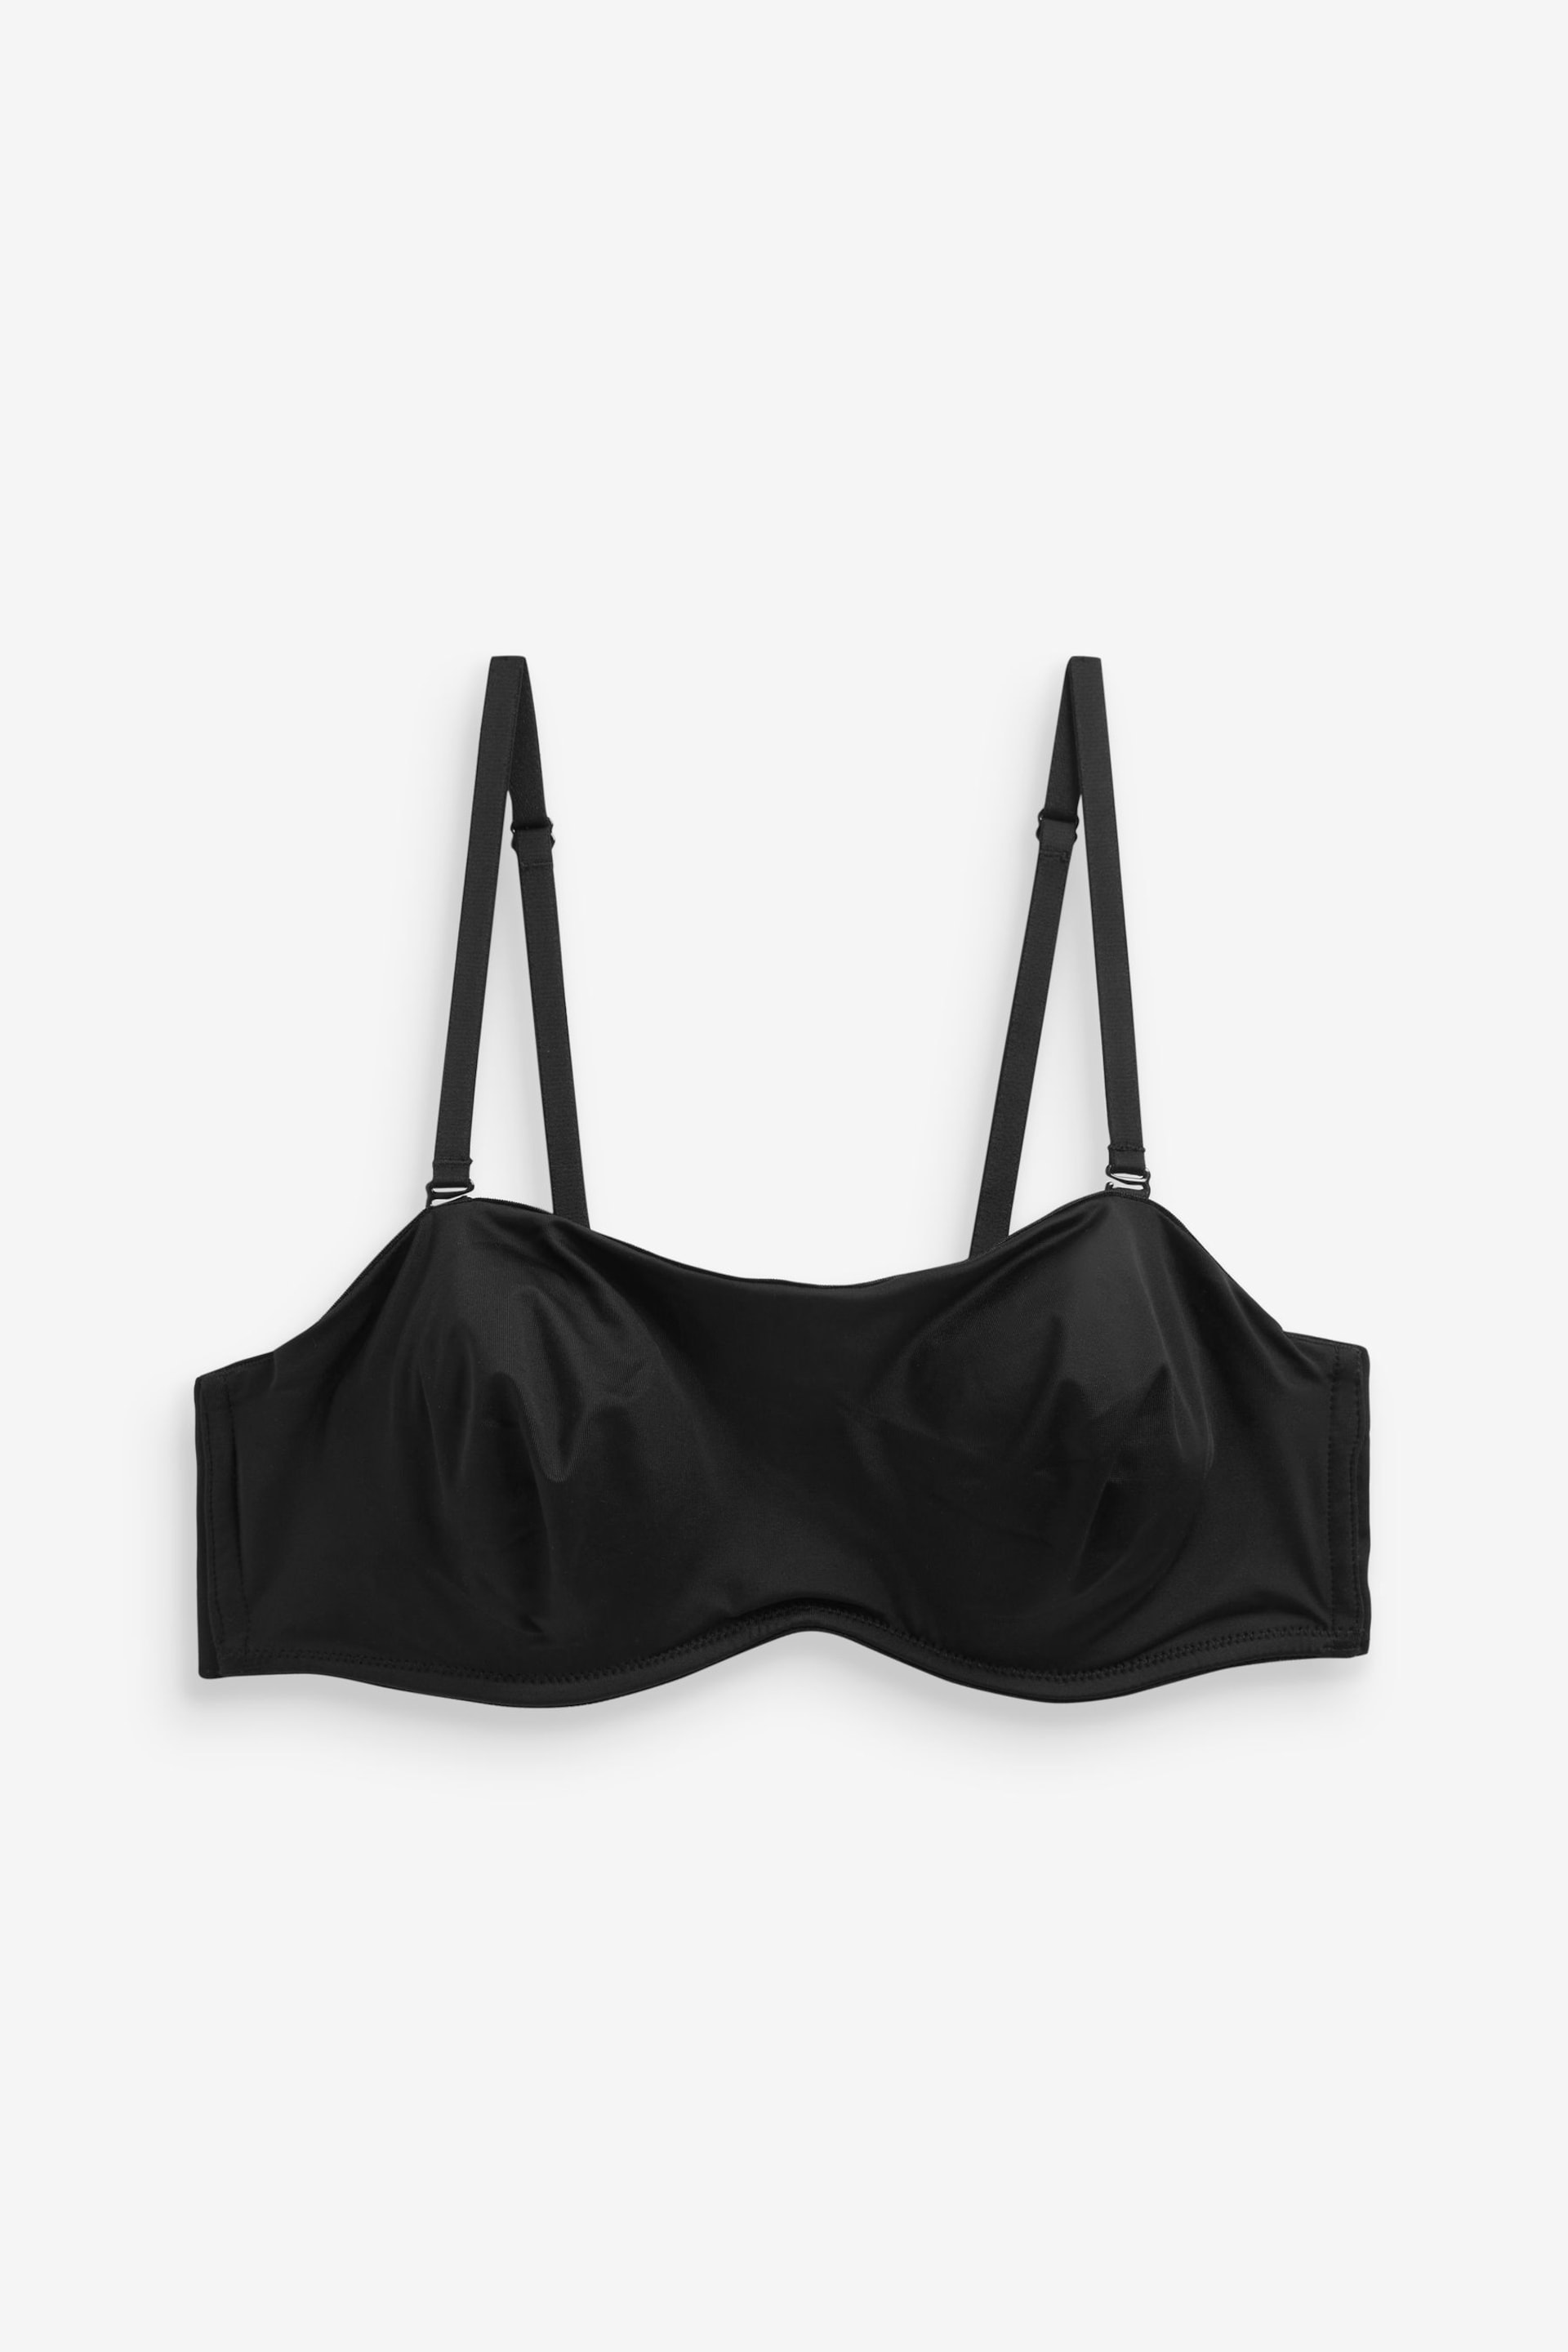 Black Smoothing Strapless Non Pad Wired Bra - Image 5 of 6